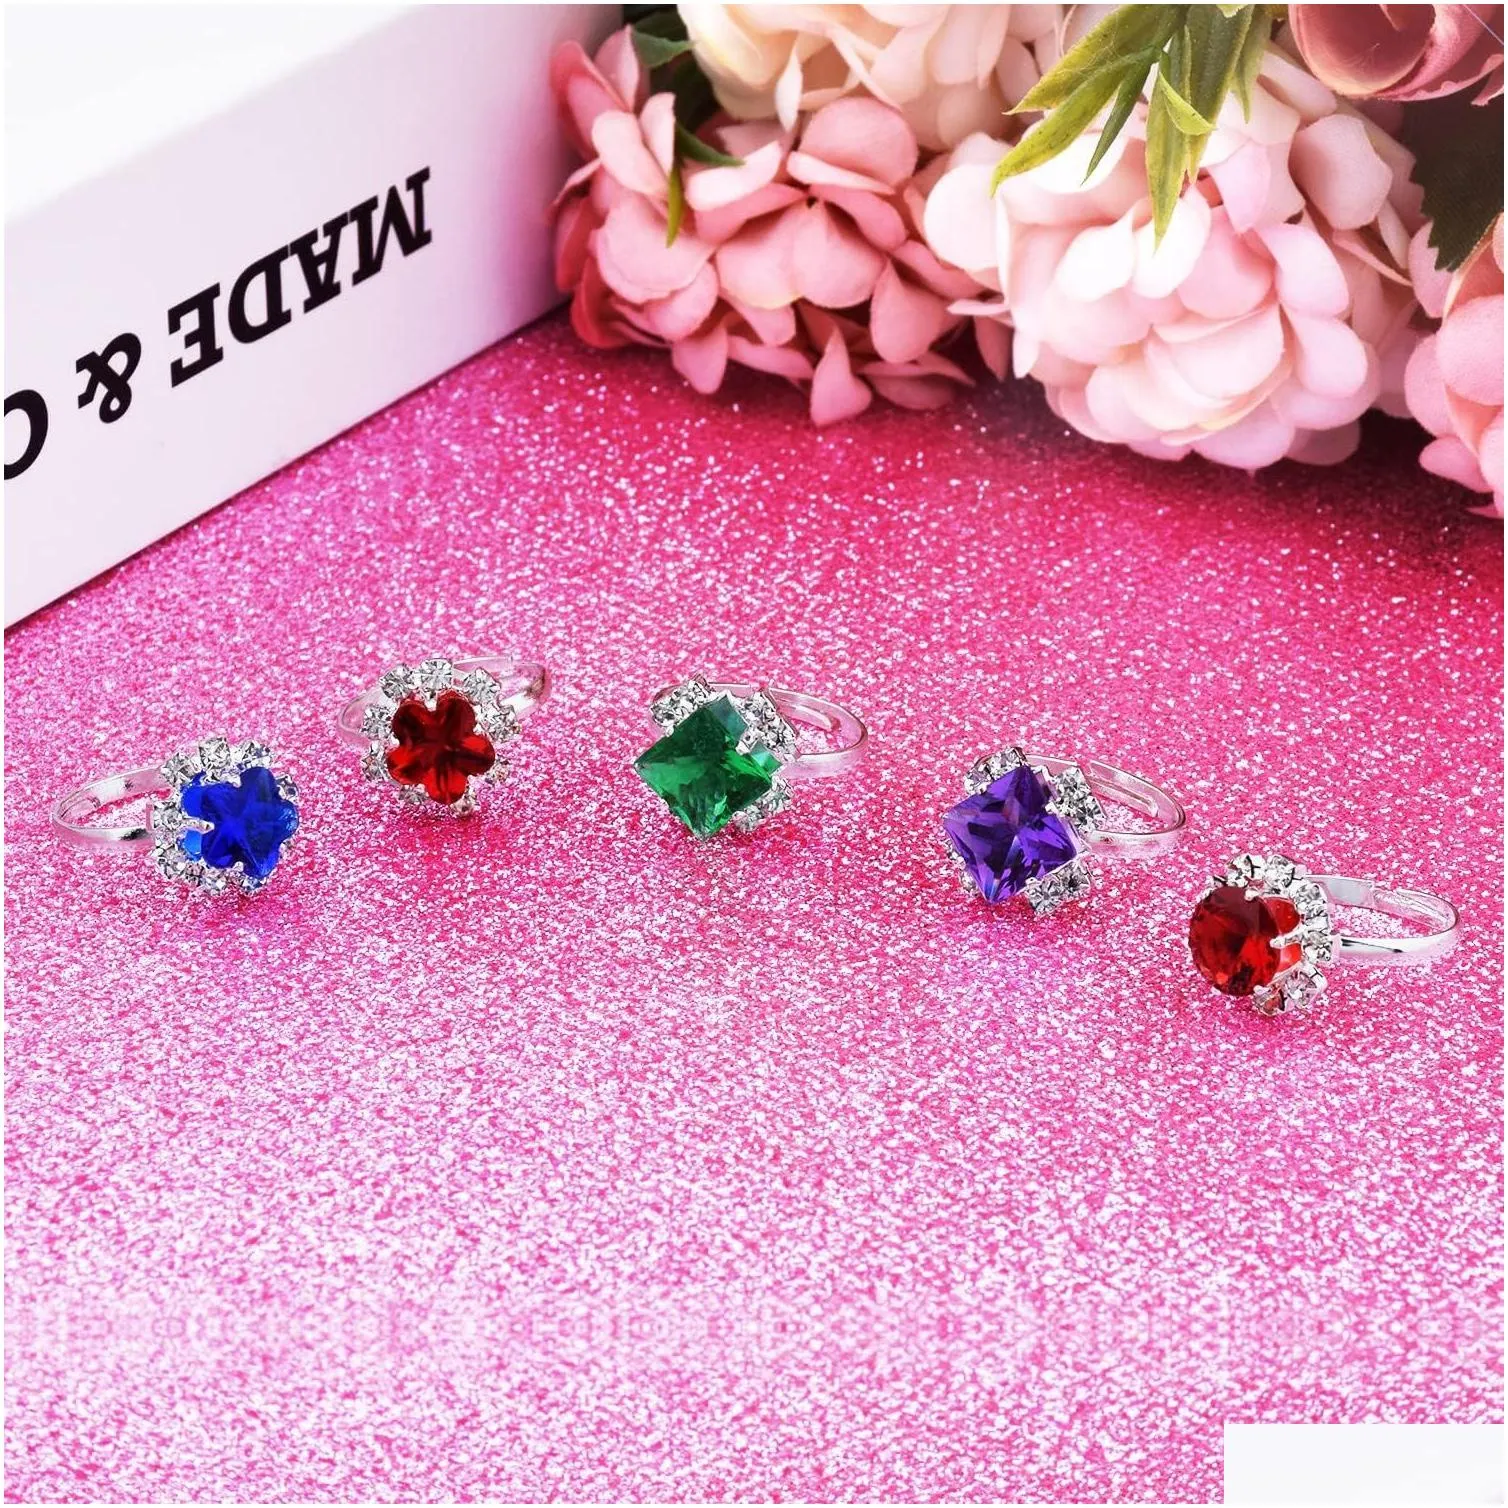 Beauty & Fashion 36 Pcs Little Girl Adjustable Rhinestone Gem Rings Toy In Box Children Kids Jewelry Ring Set Toys With Heart Shape Di Dhifk